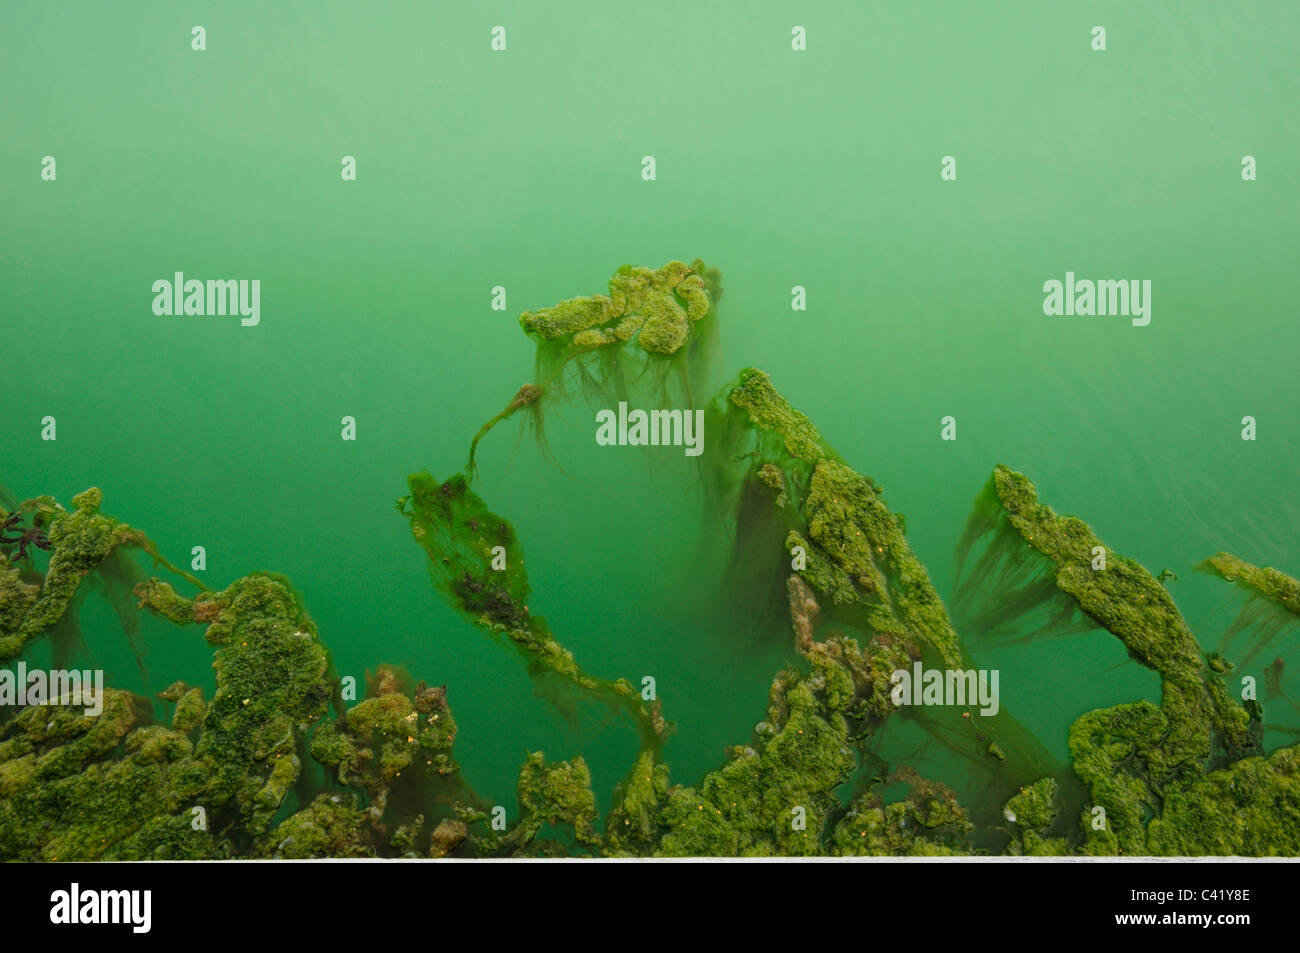 Strands of green sea-weed floating on the surface of the sea. Stock Photo